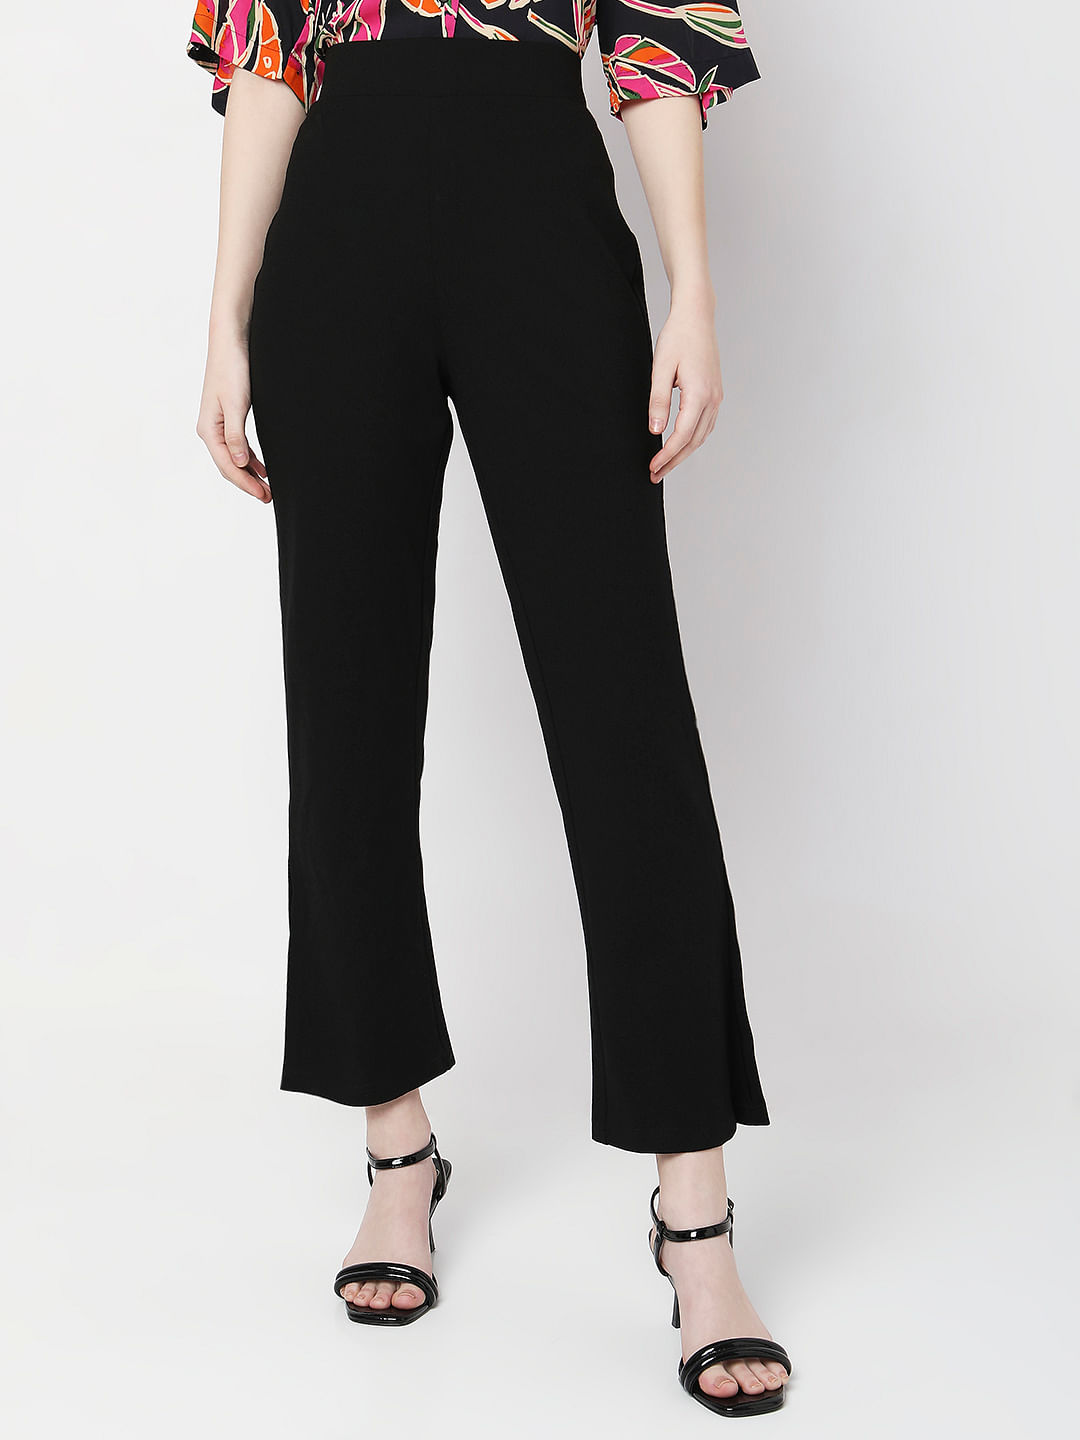 Buy Black Bootcut Trousers With Stretch - 14L | Trousers | Argos